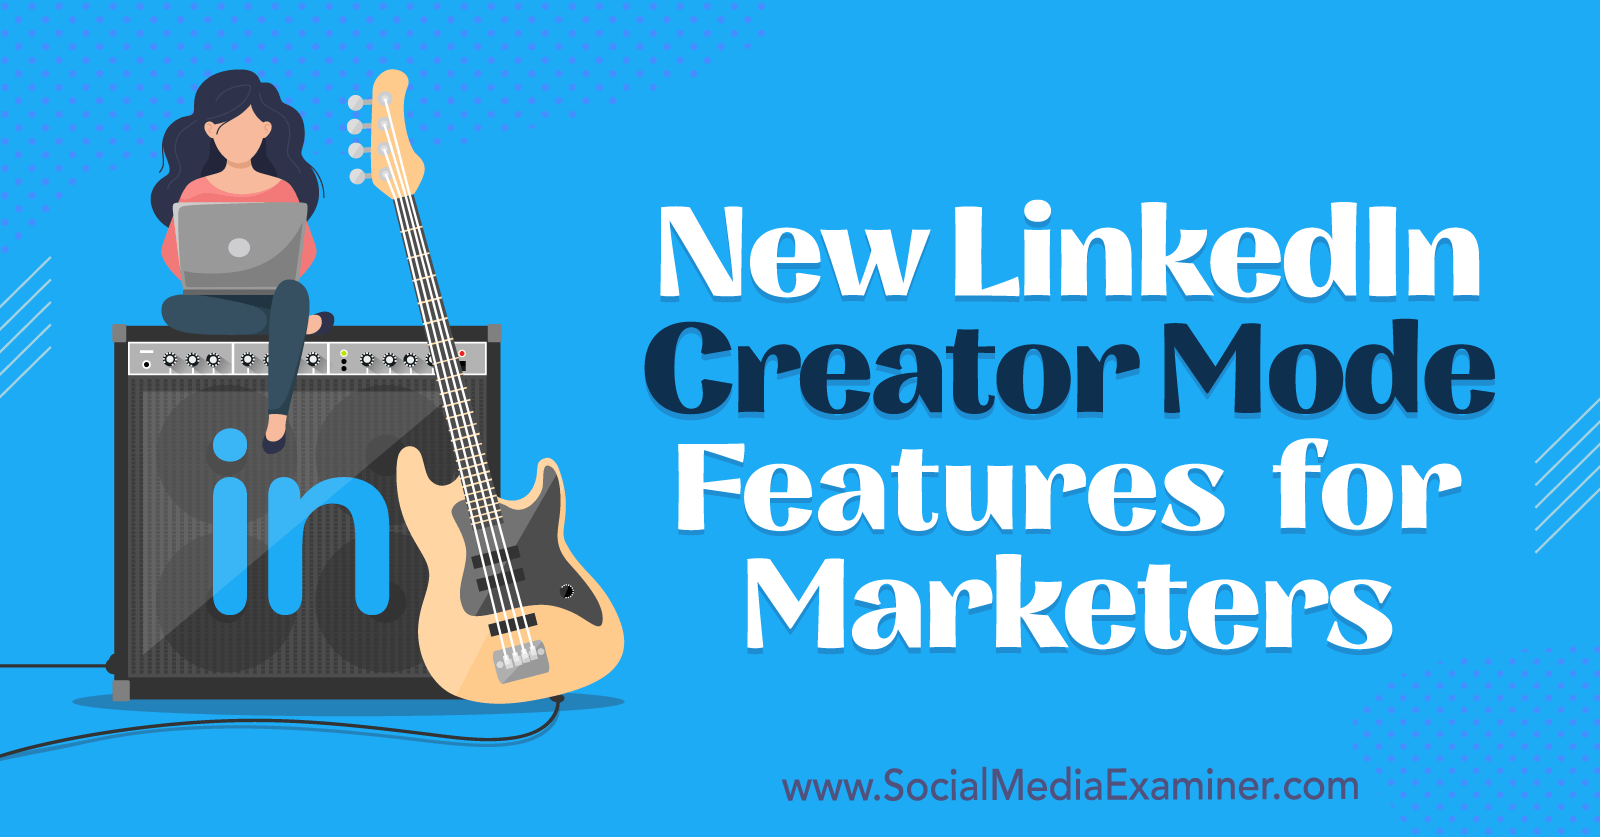 New LinkedIn Creator Mode Features for Marketers by Anna Sonnenberg on Social Media Examiner.